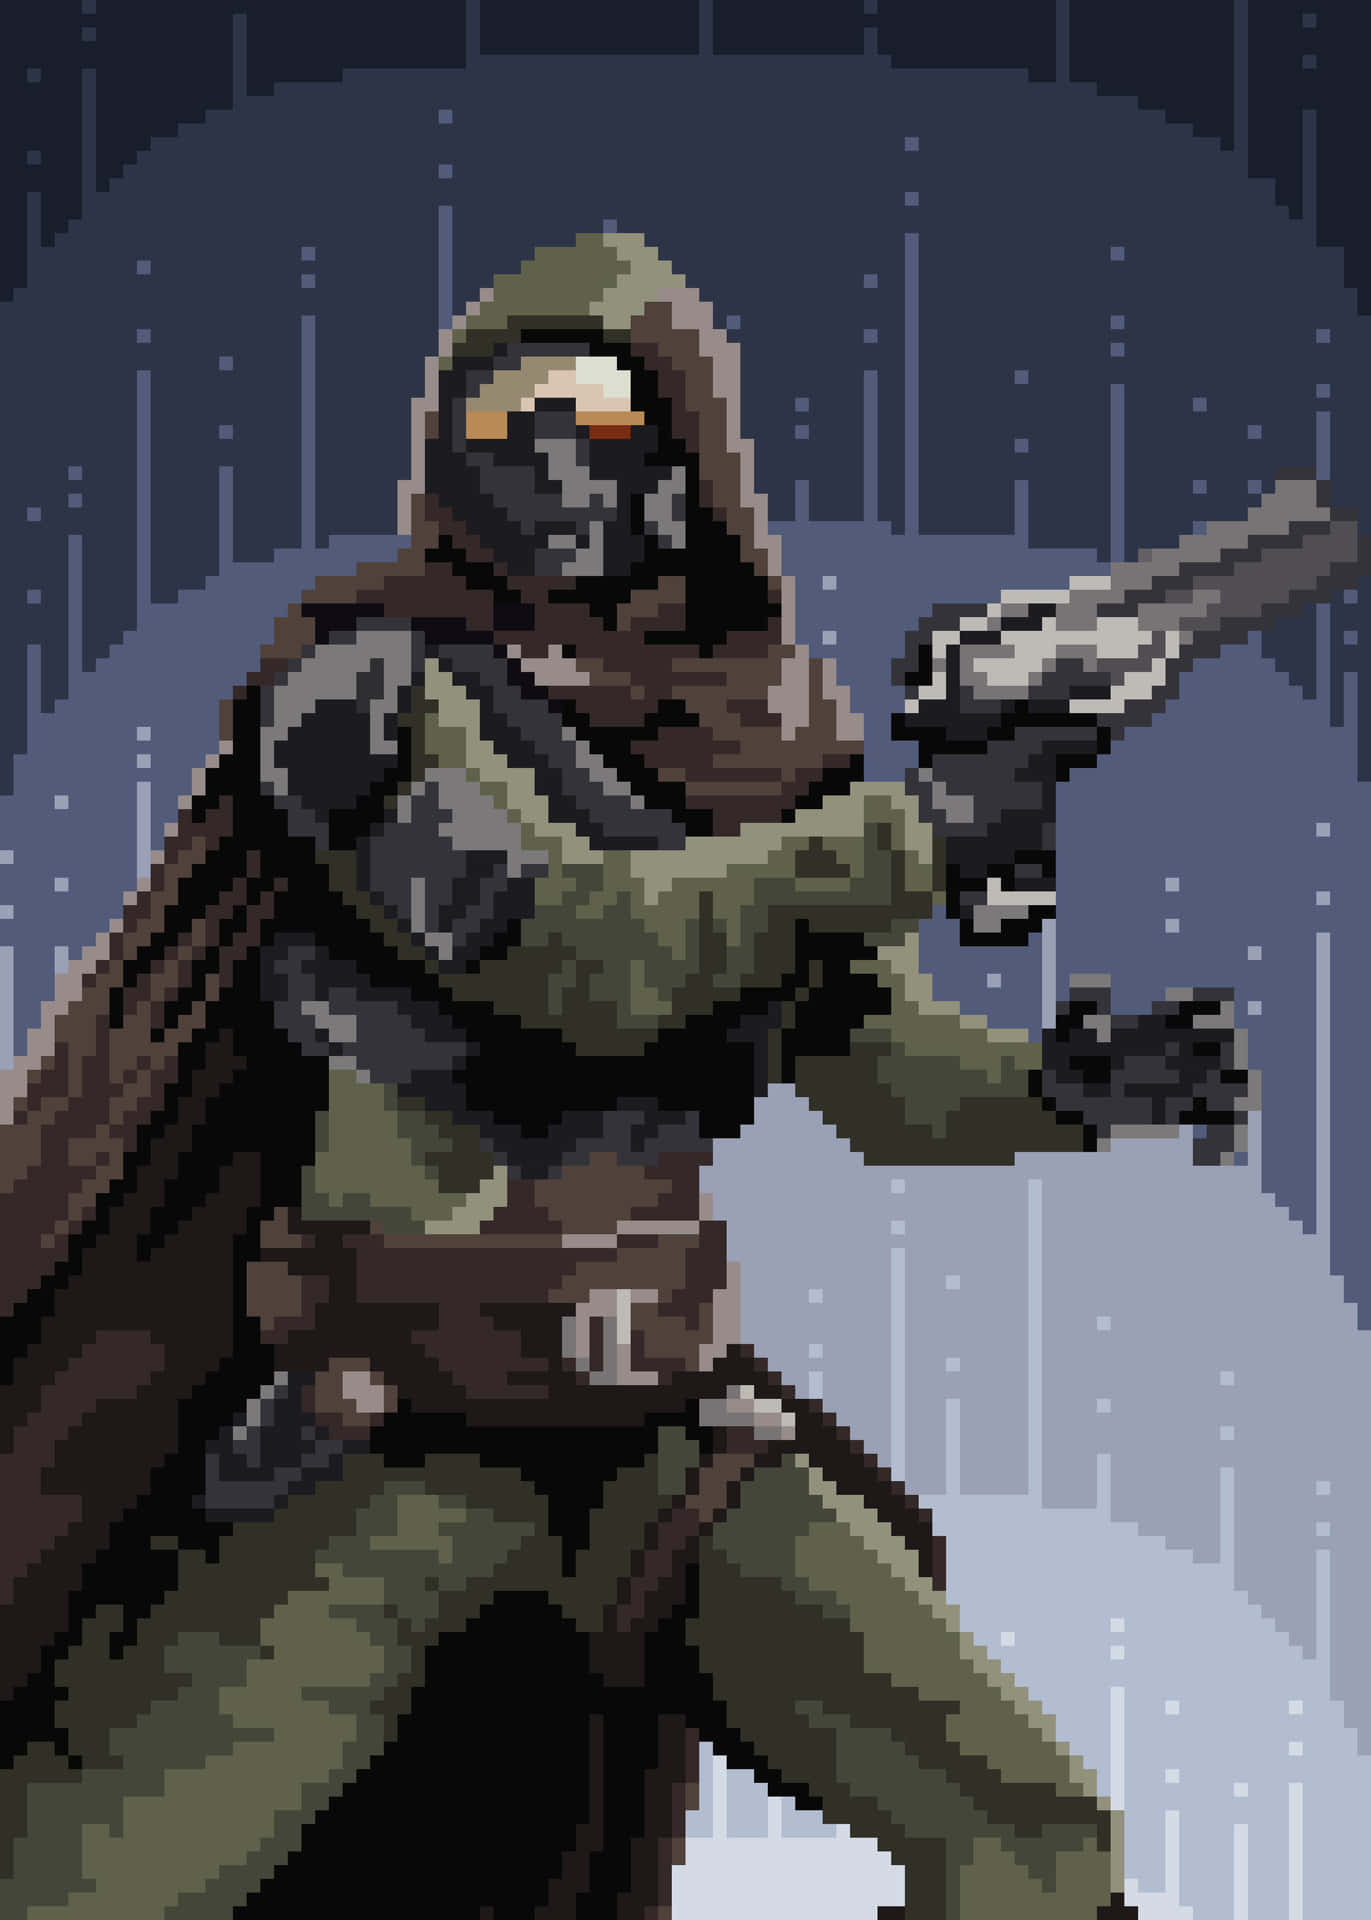 Pixel Art Of The Guardians Of The Last City From Destiny